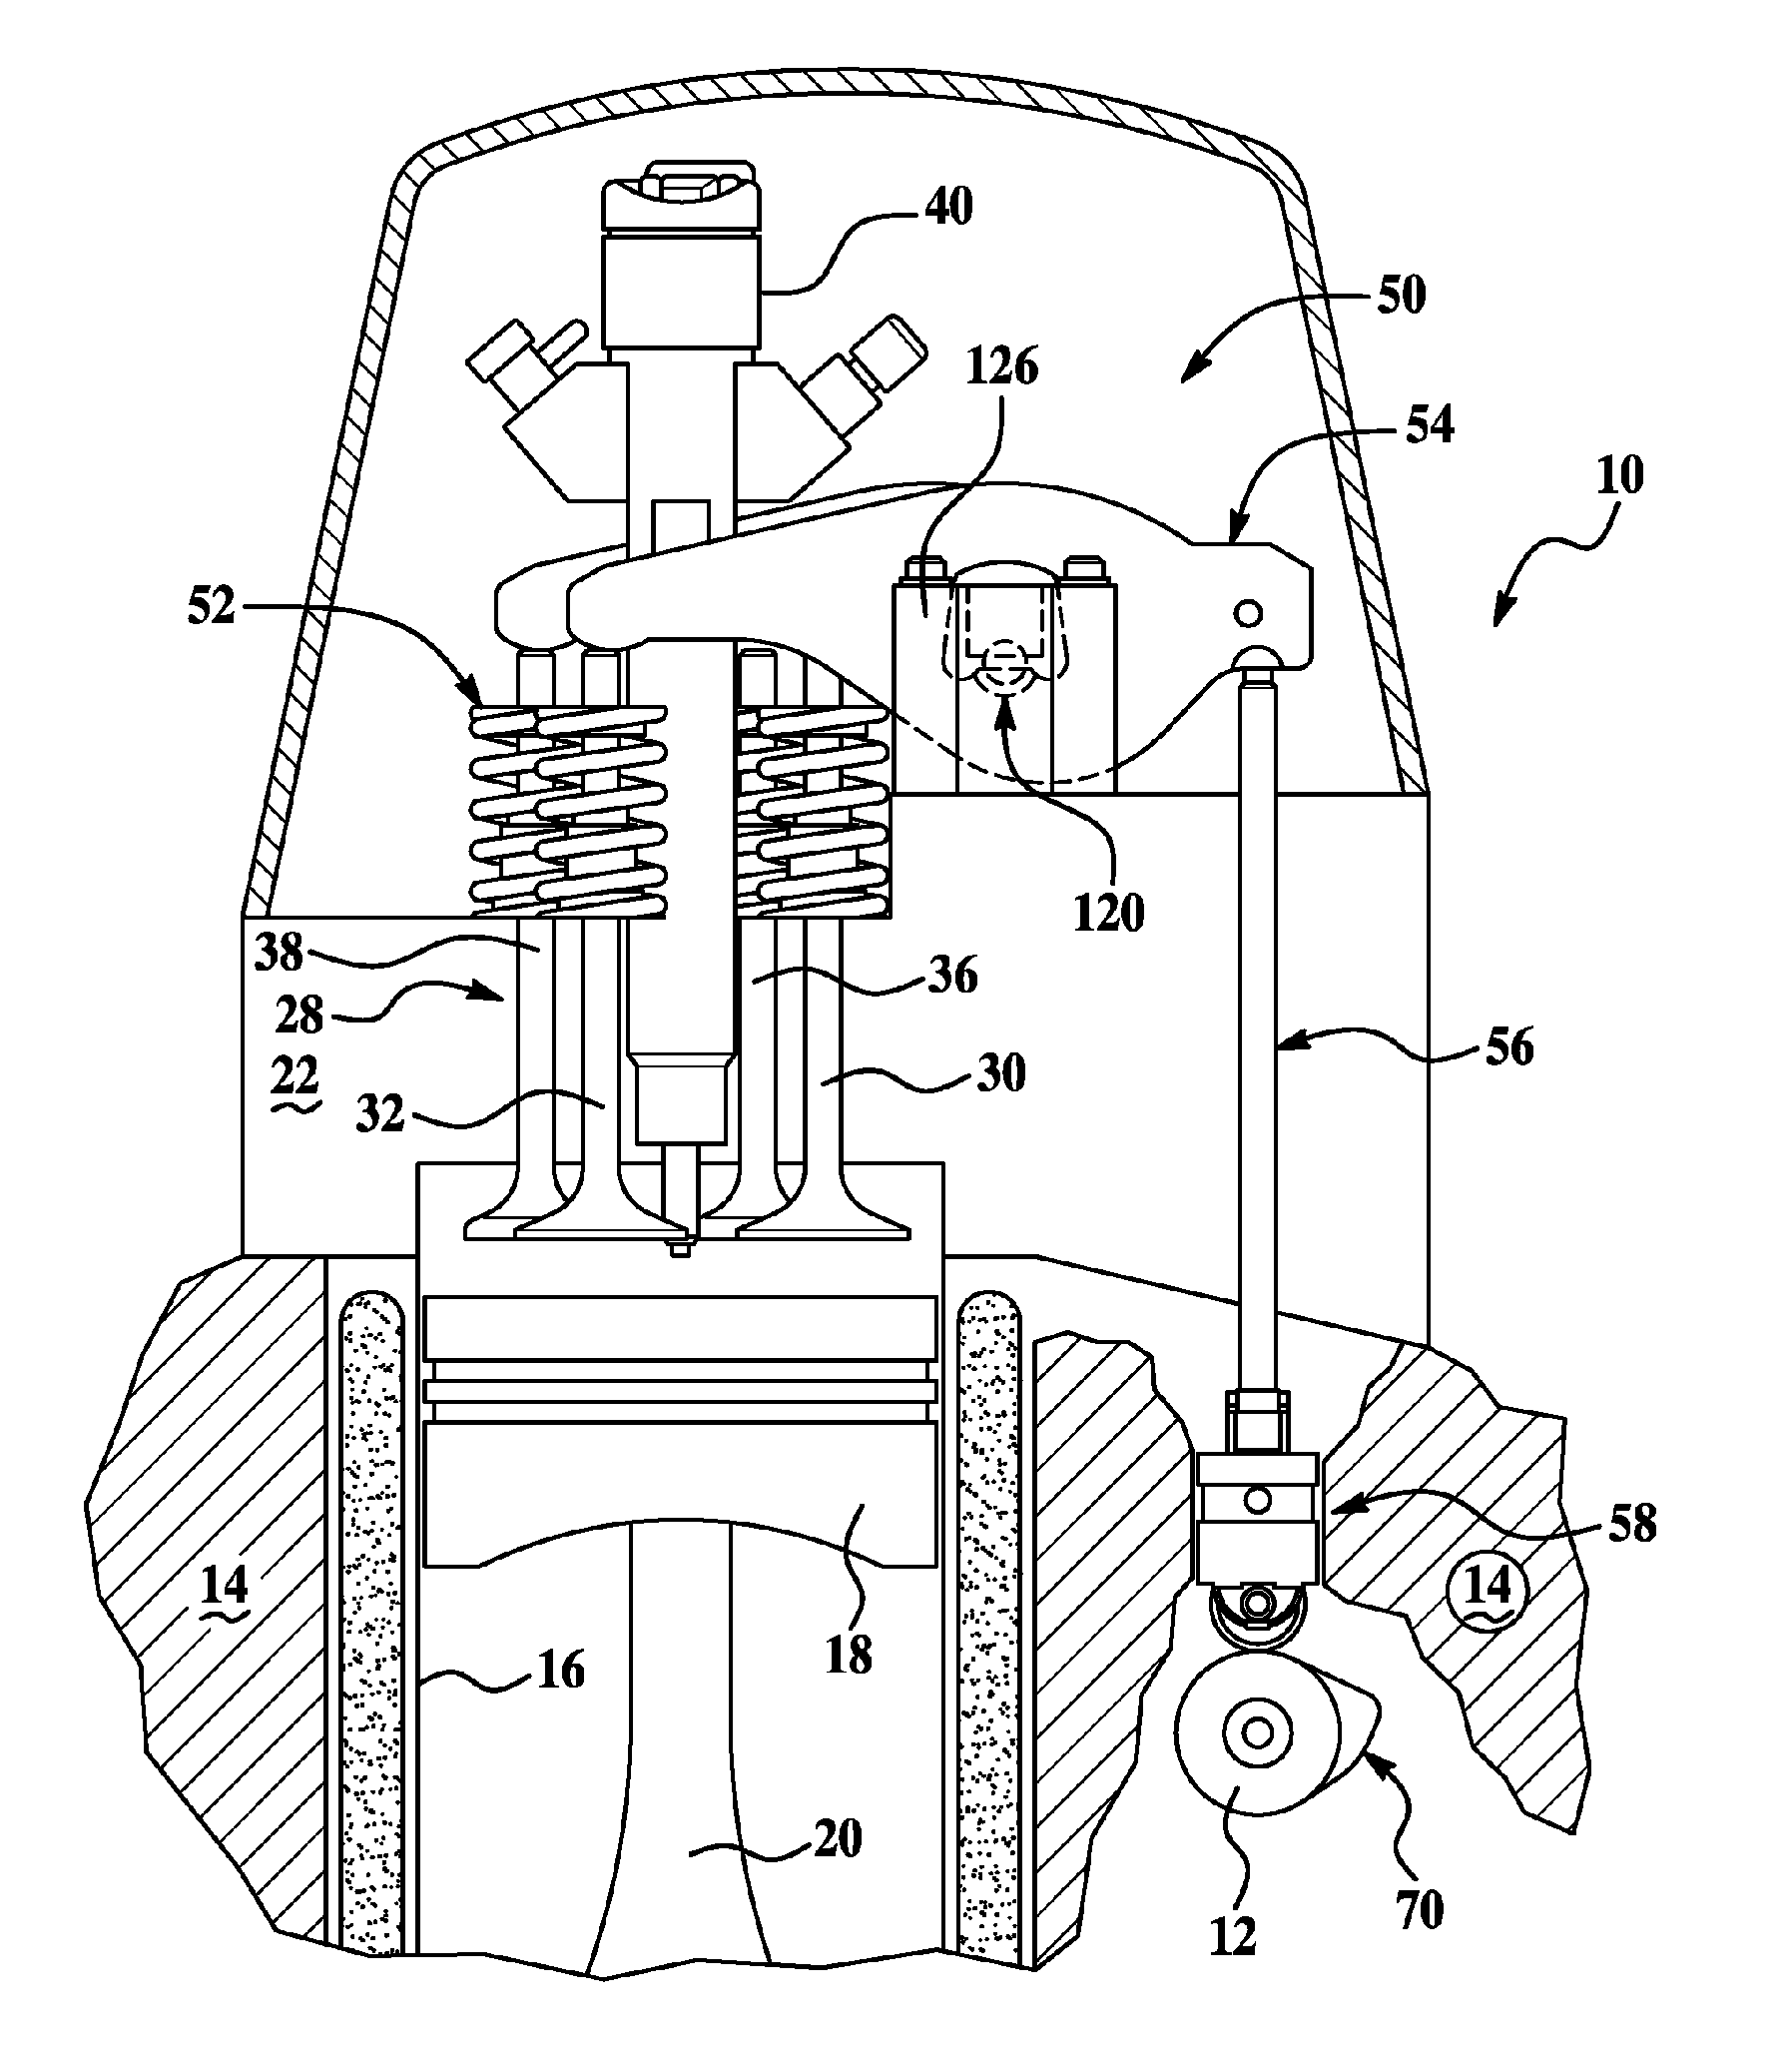 Engine and valvetrain with dual pushrod lifters and independent lash adjustment